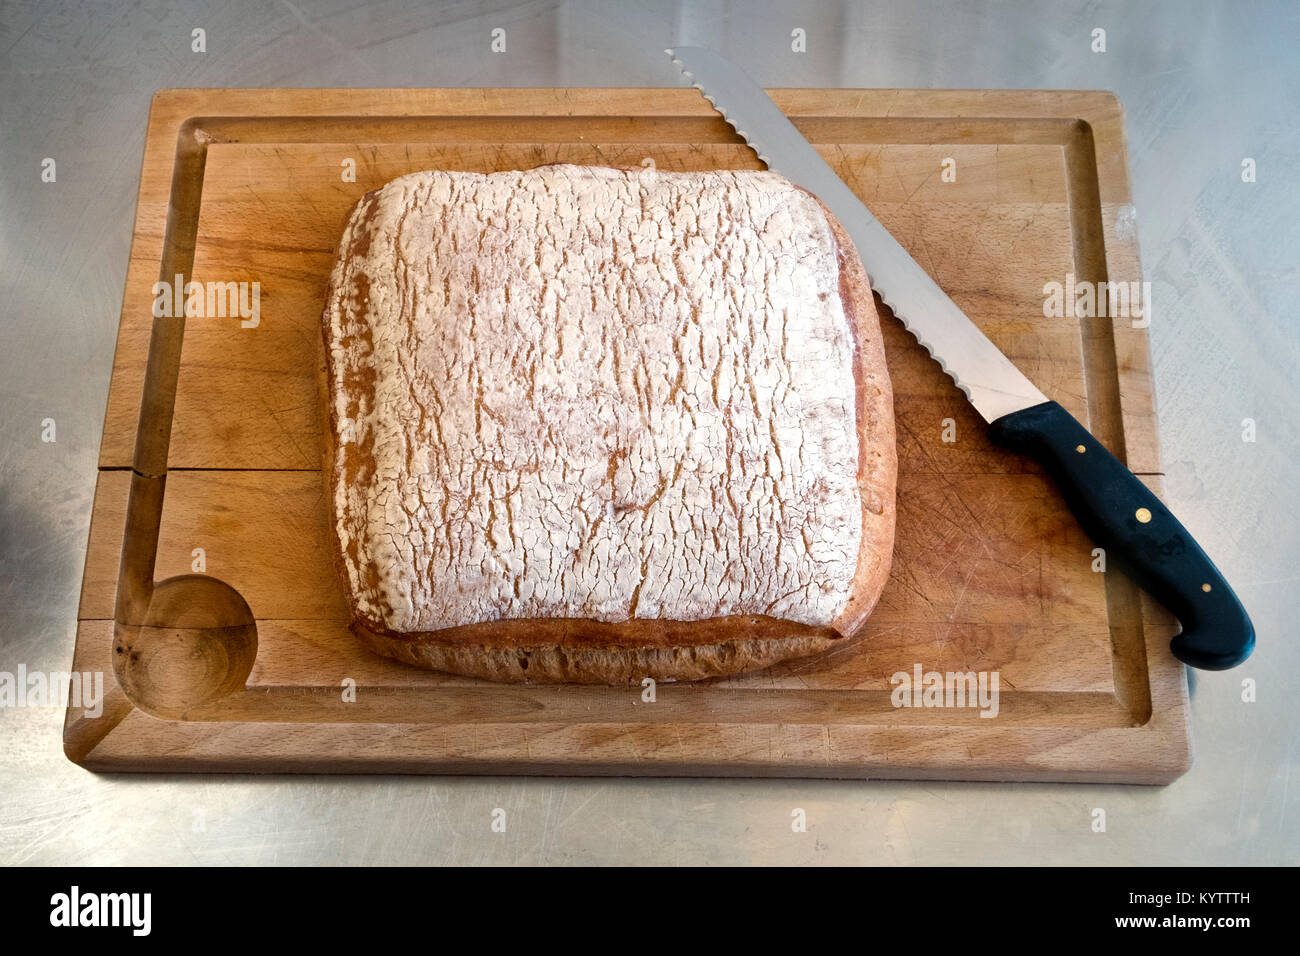 A rustic artisan style French bread loaf waits on a chopping board on a stainless steel kitchen work surface Stock Photo